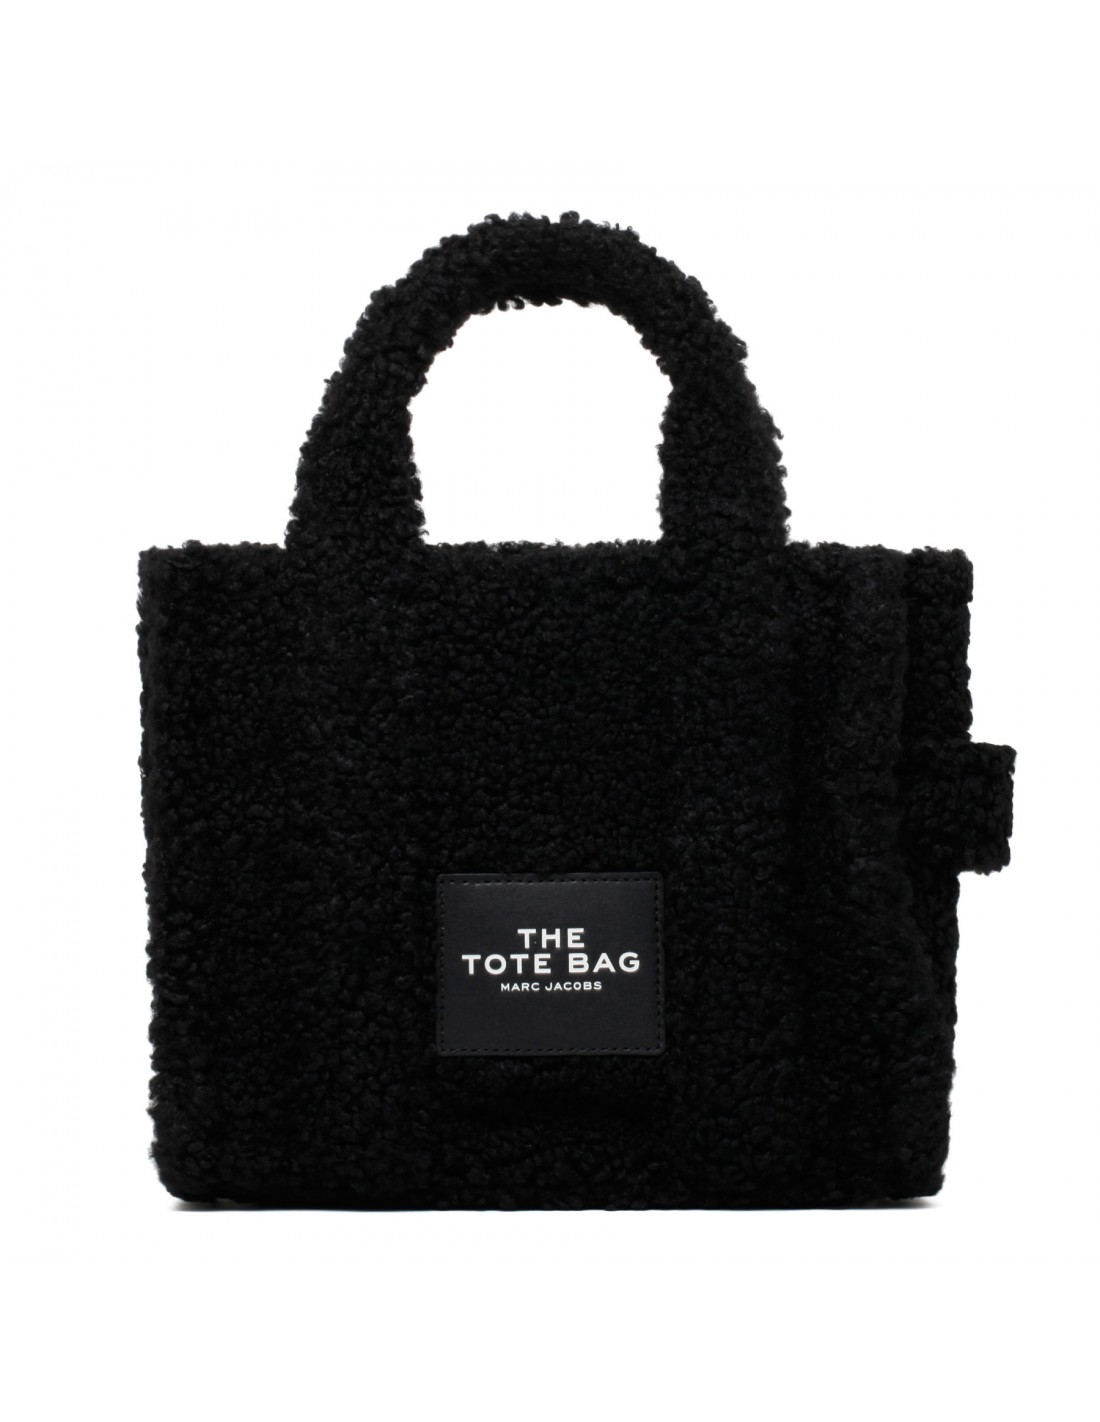 The Teddy Small tote bag